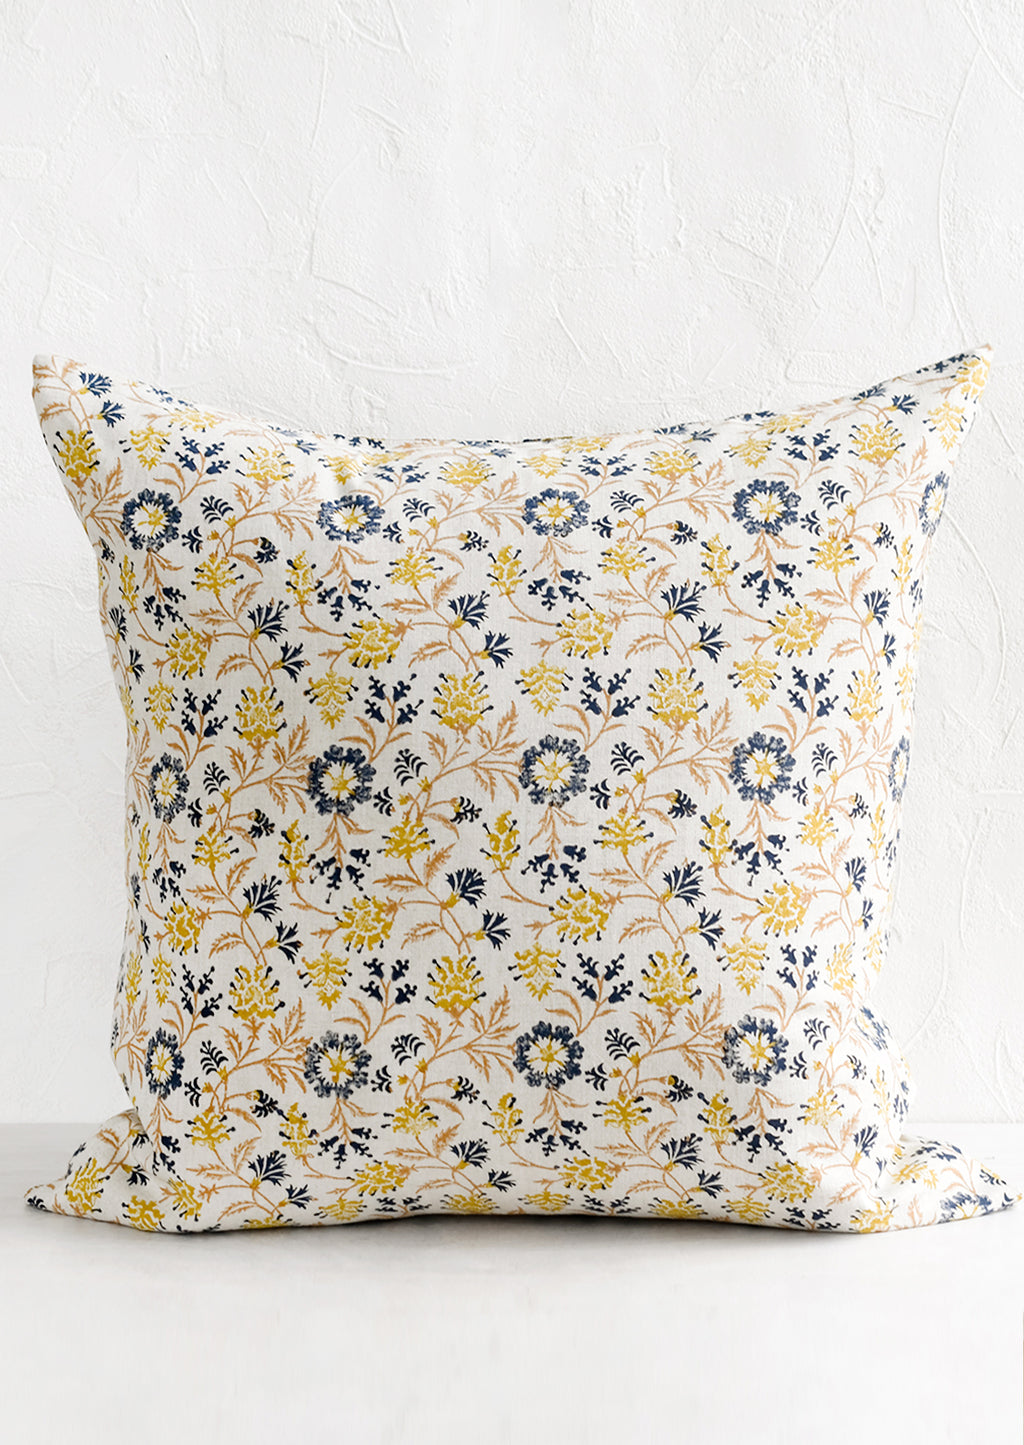 1: A block printed pillow in navy, brown and yellow floral print on natural linen.